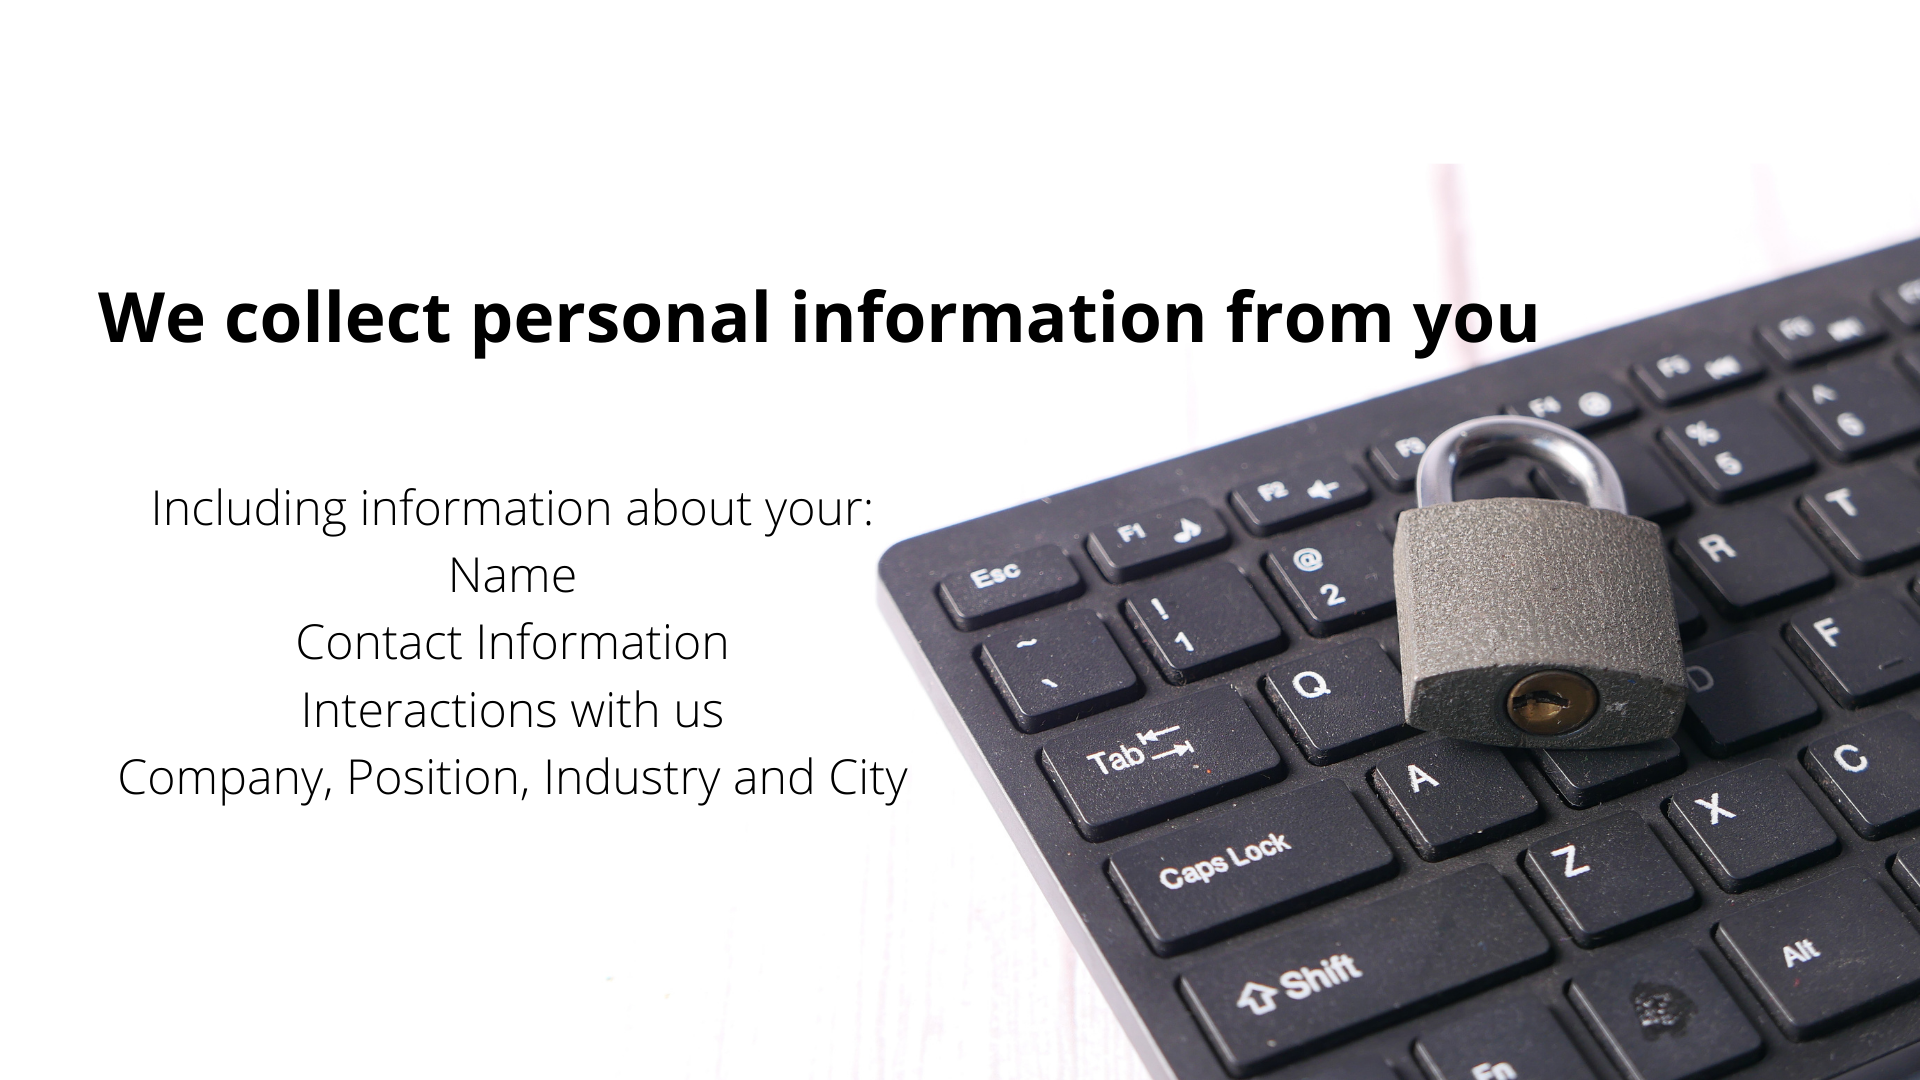 We collect personal information from you!